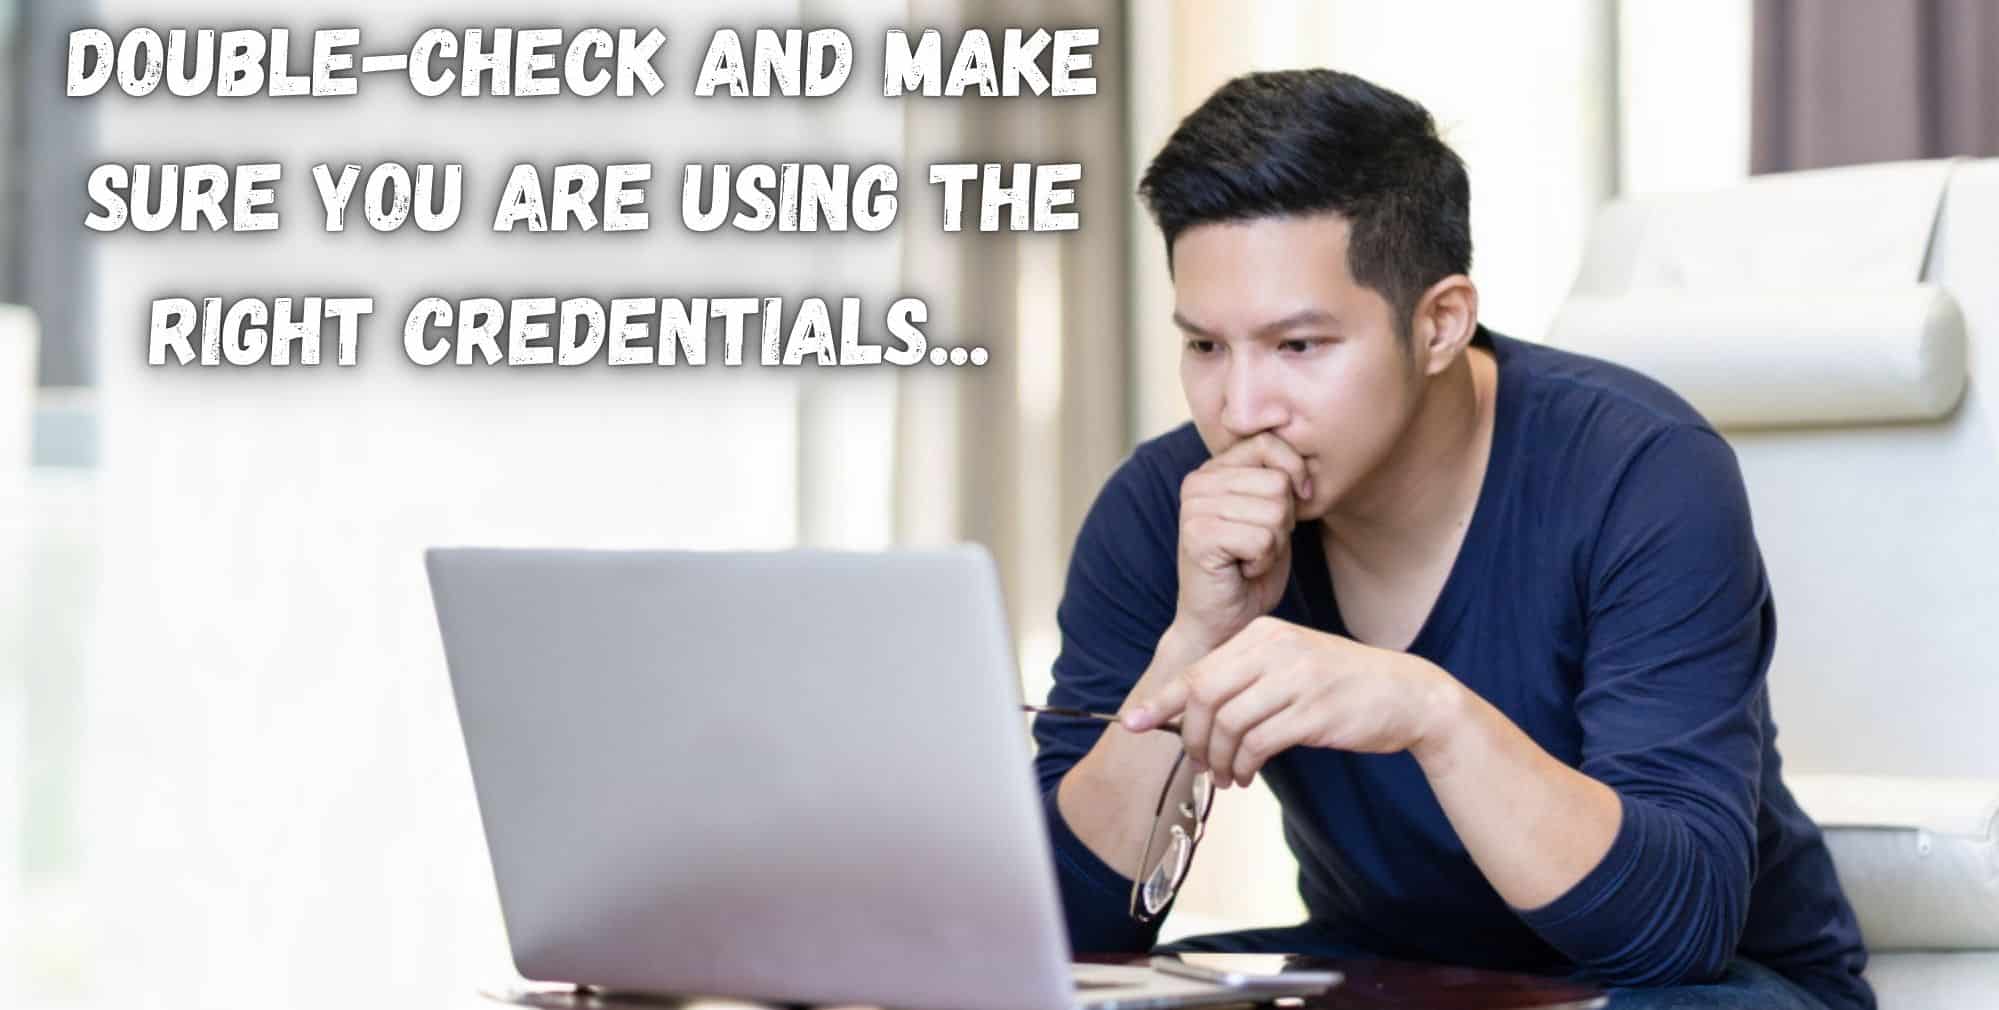 Double-check and make sure you are using the right credentials